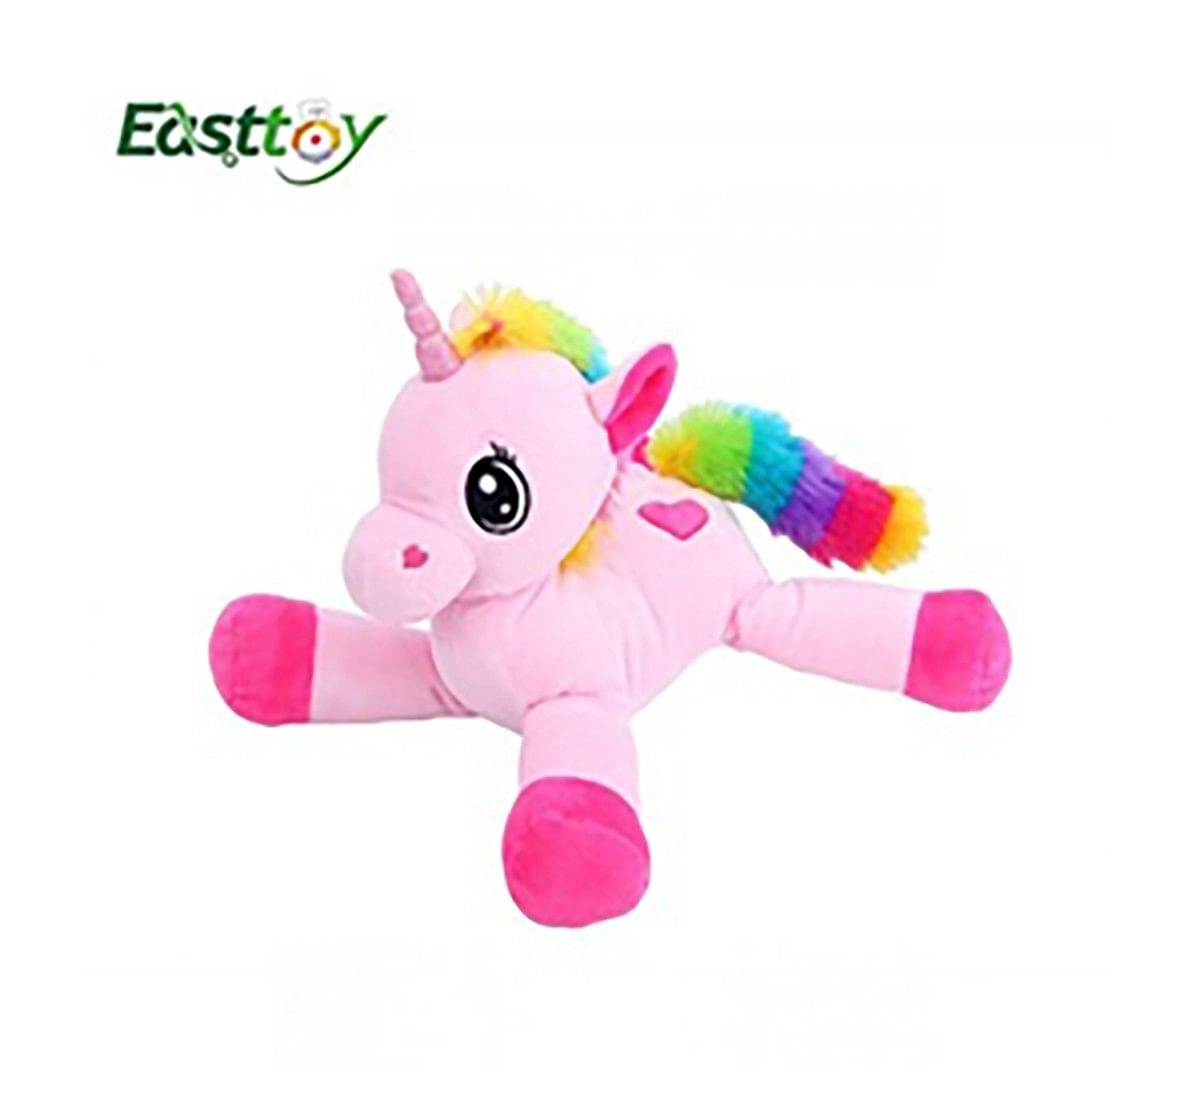 Qingdao Unicorn Plush Pink And Purple -95 Cms Quirky Soft Toys for Kids age 12M+ - 27 Cm (Pink)